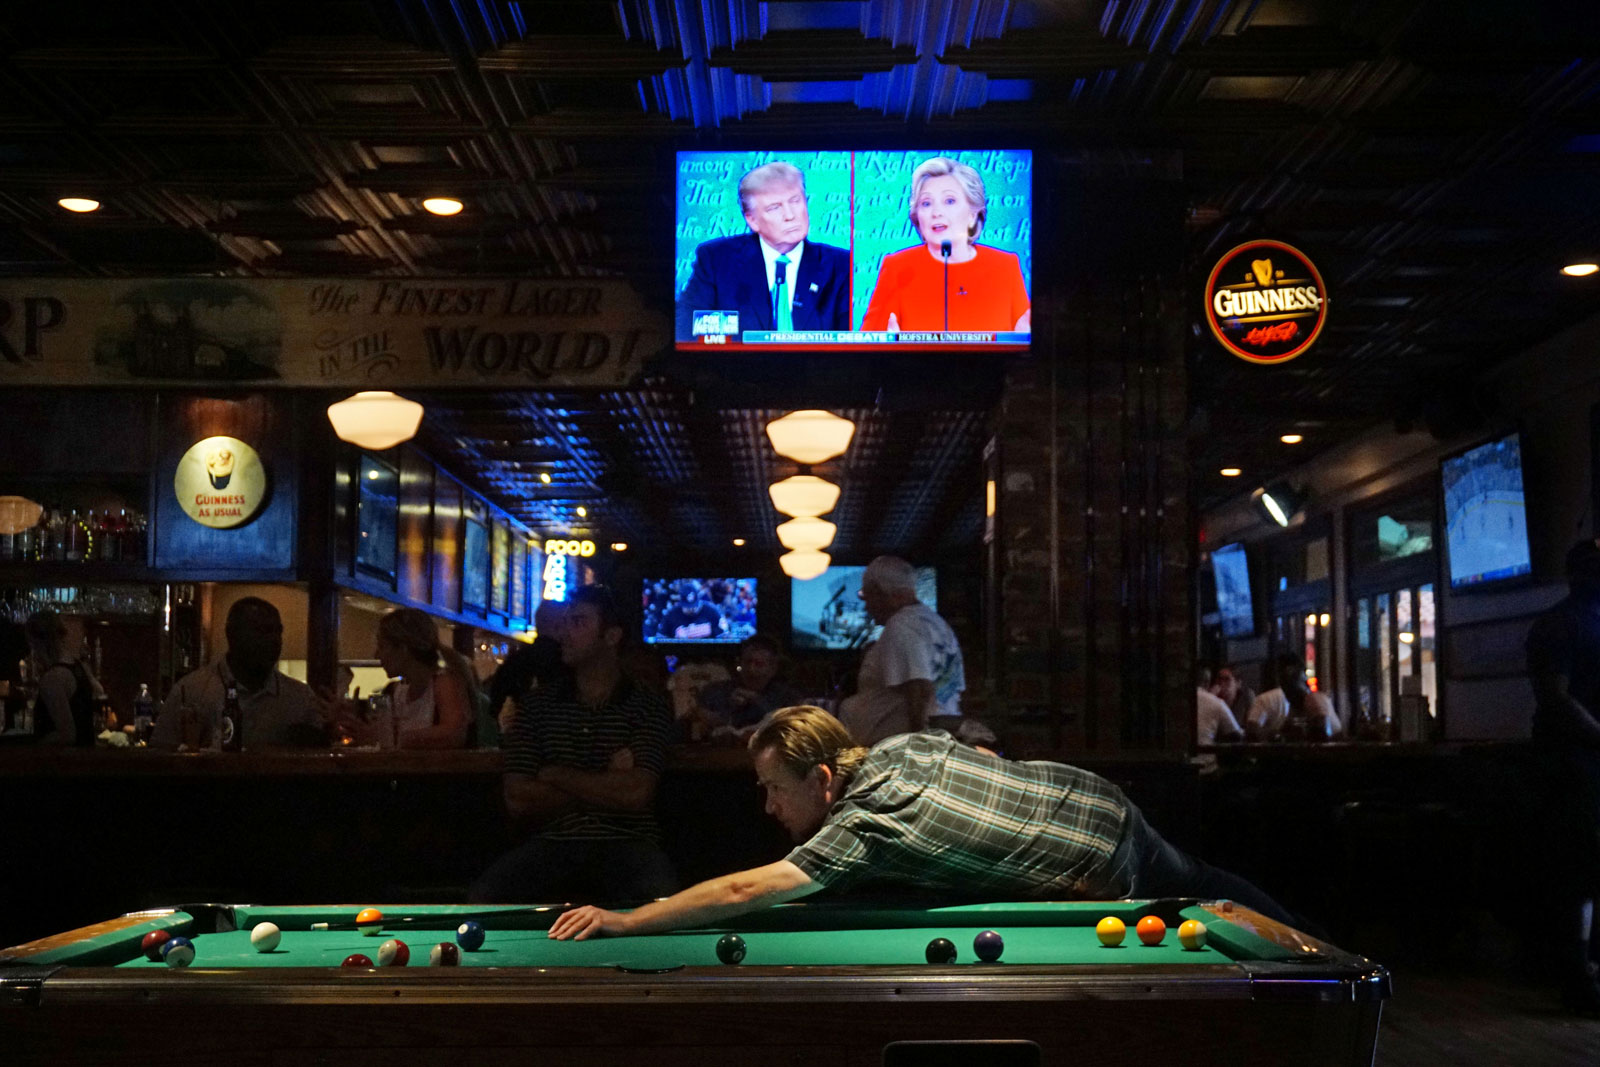 Patrons at McGregor's Bar and Grill during the first presidential debate, San Diego, California, September 26, 2016